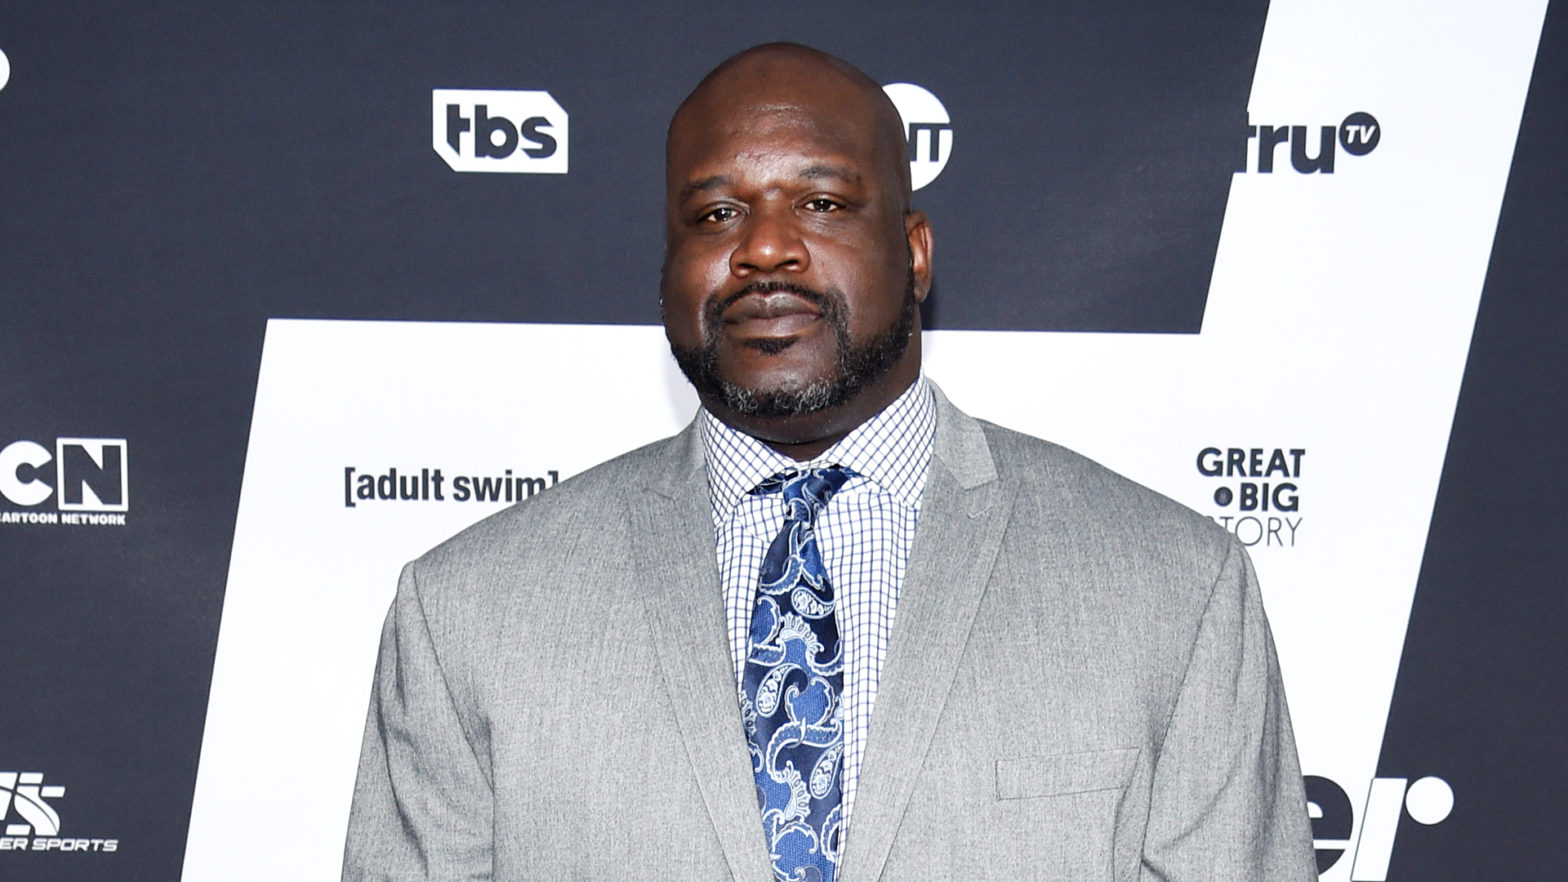 Shaquille O'Neal To Sell His Minority Ownership Stake In NBA Team Worth Nearly $1.9B